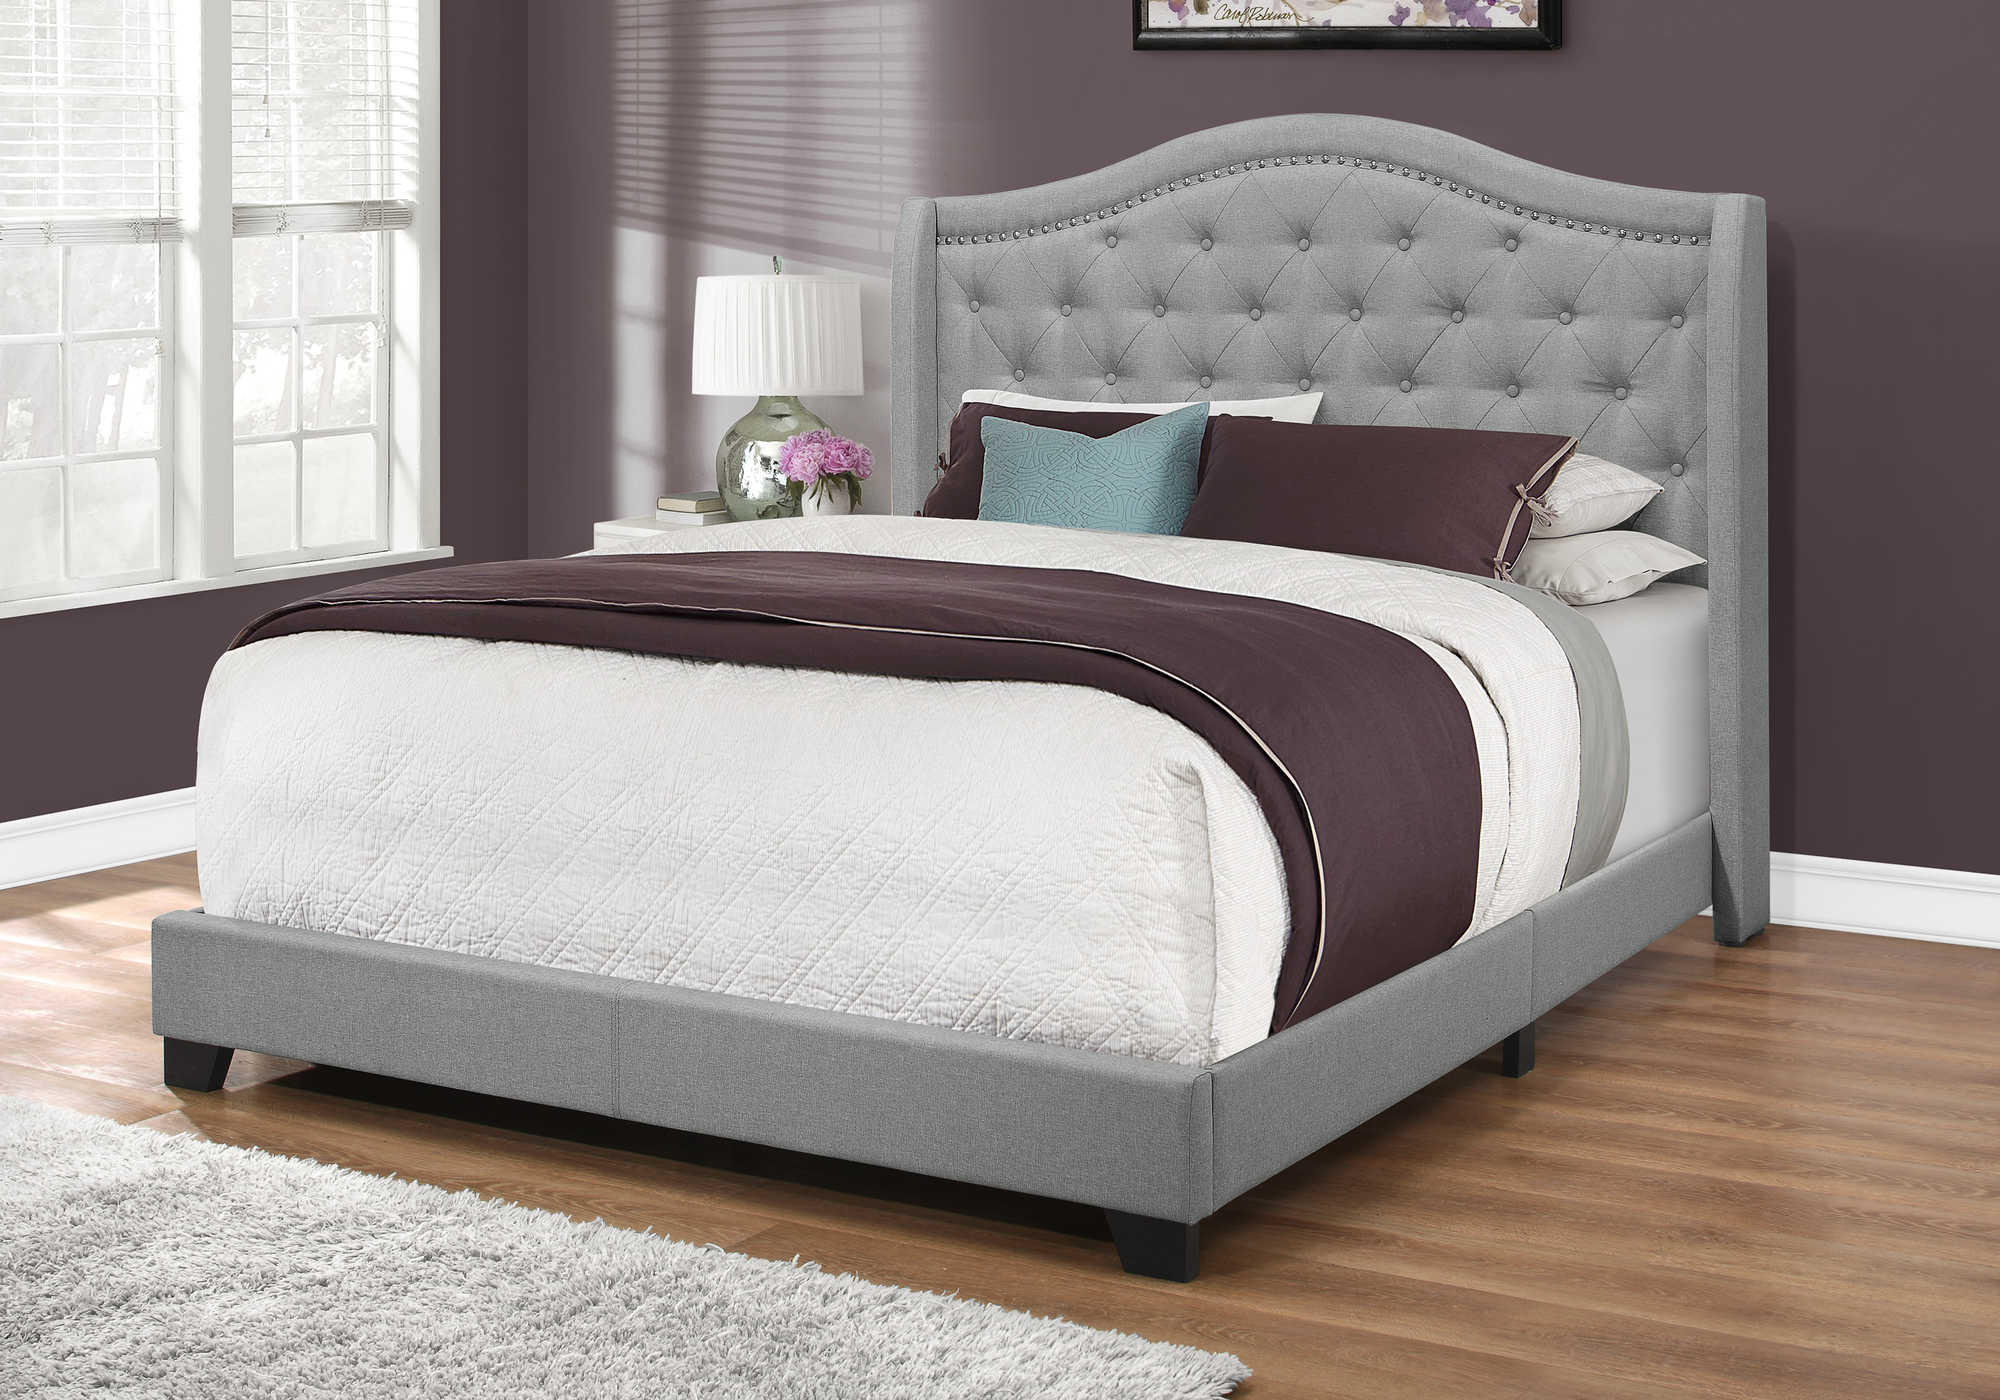 BED - QUEEN SIZE / GREY LINEN WITH CHROME TRIM